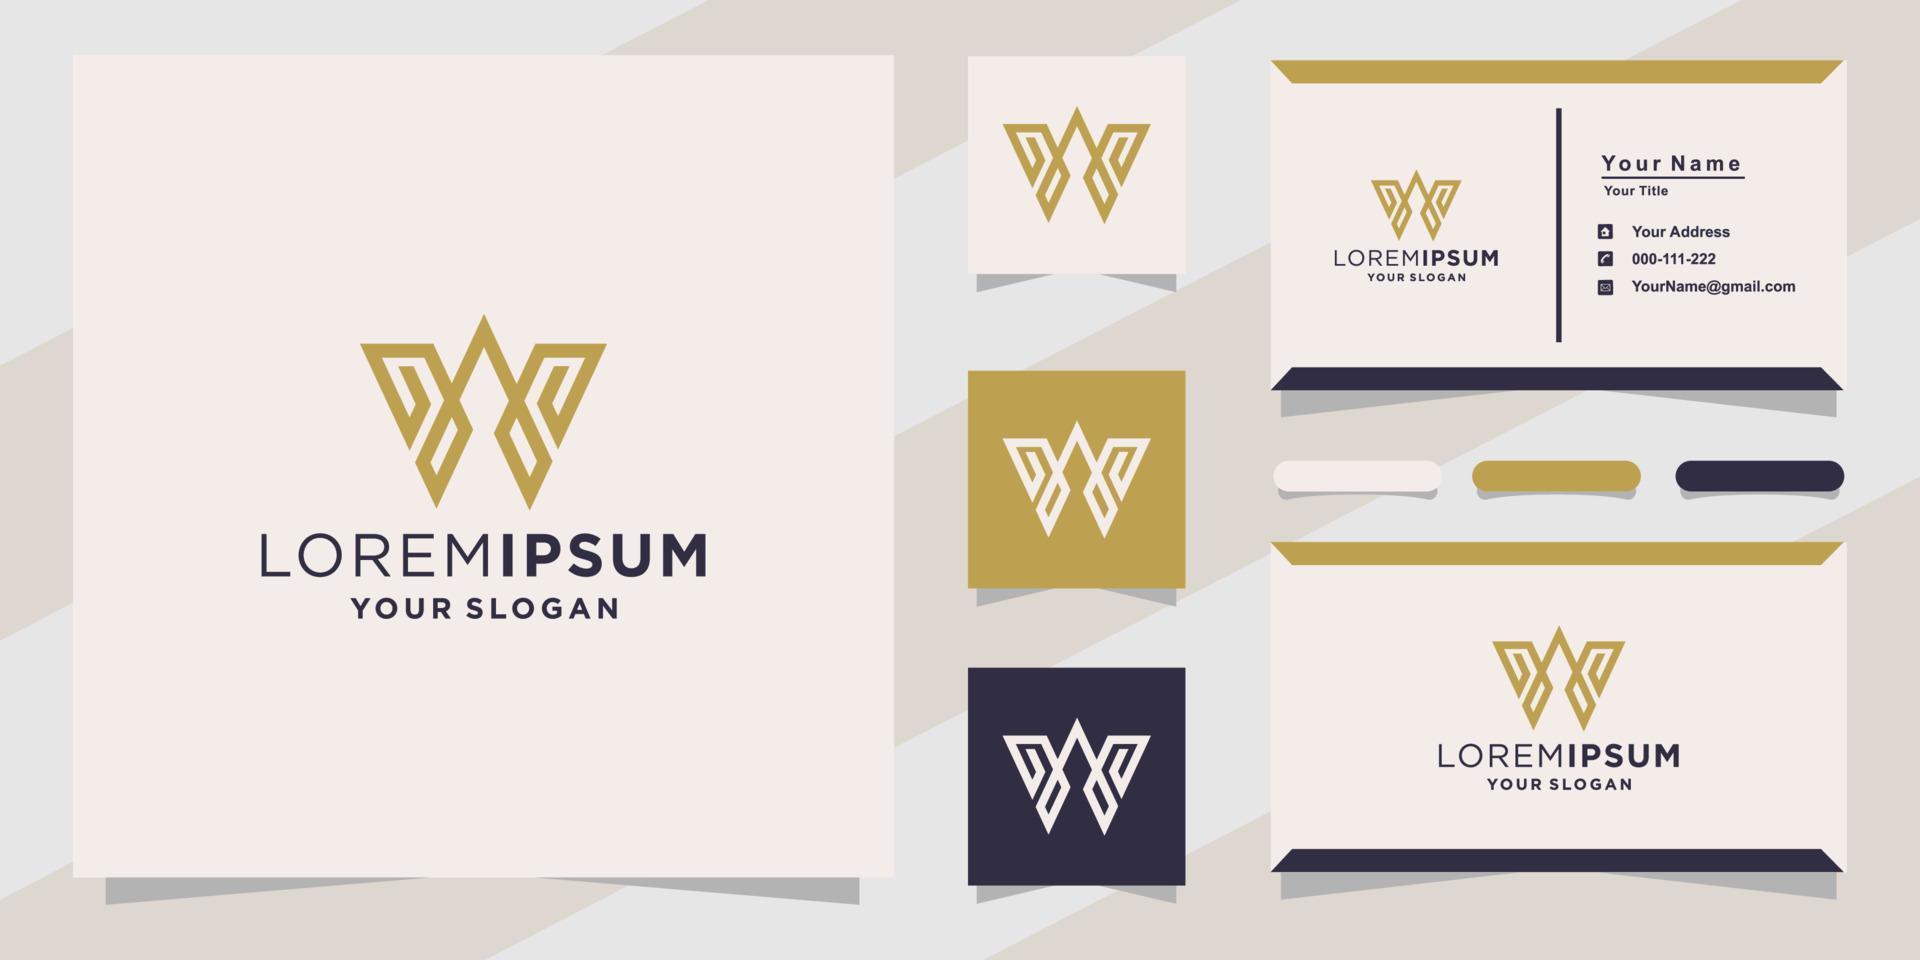 letter w logo for company with business card template vector